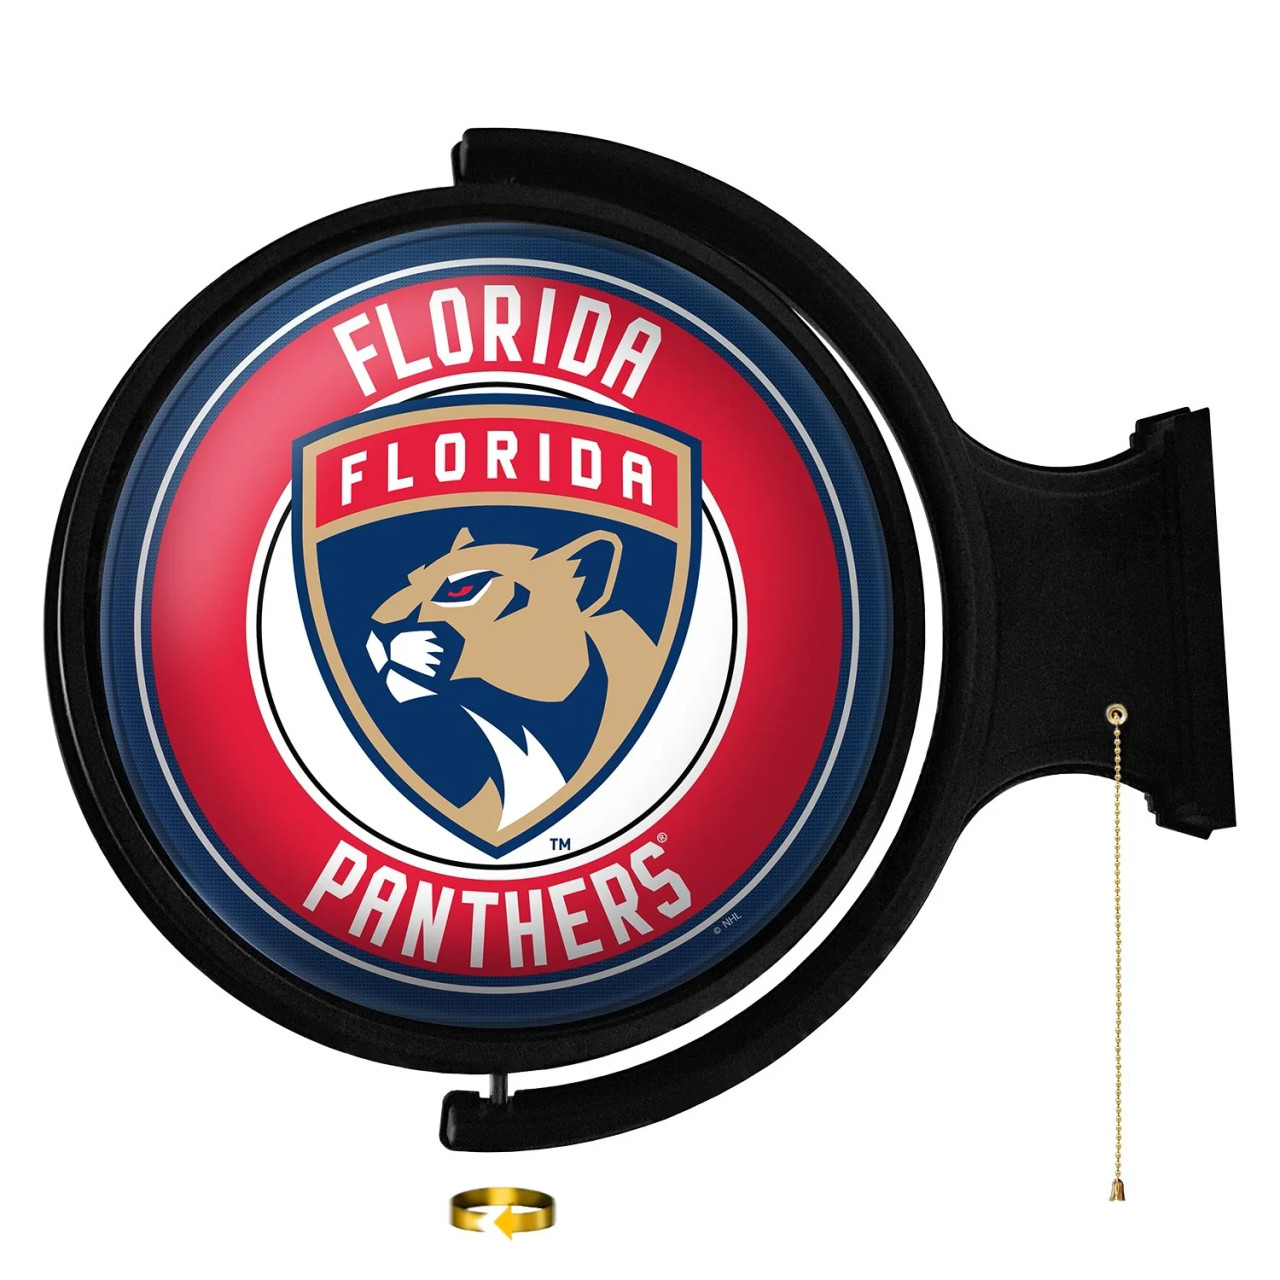 NHFLOR-115-01, Fl, Florida, Panthers, Original, Round, Rotating, Lighted, Wall, Sign, NHFLOR-115-01, NHL, The Fan-Brand, 686878992267